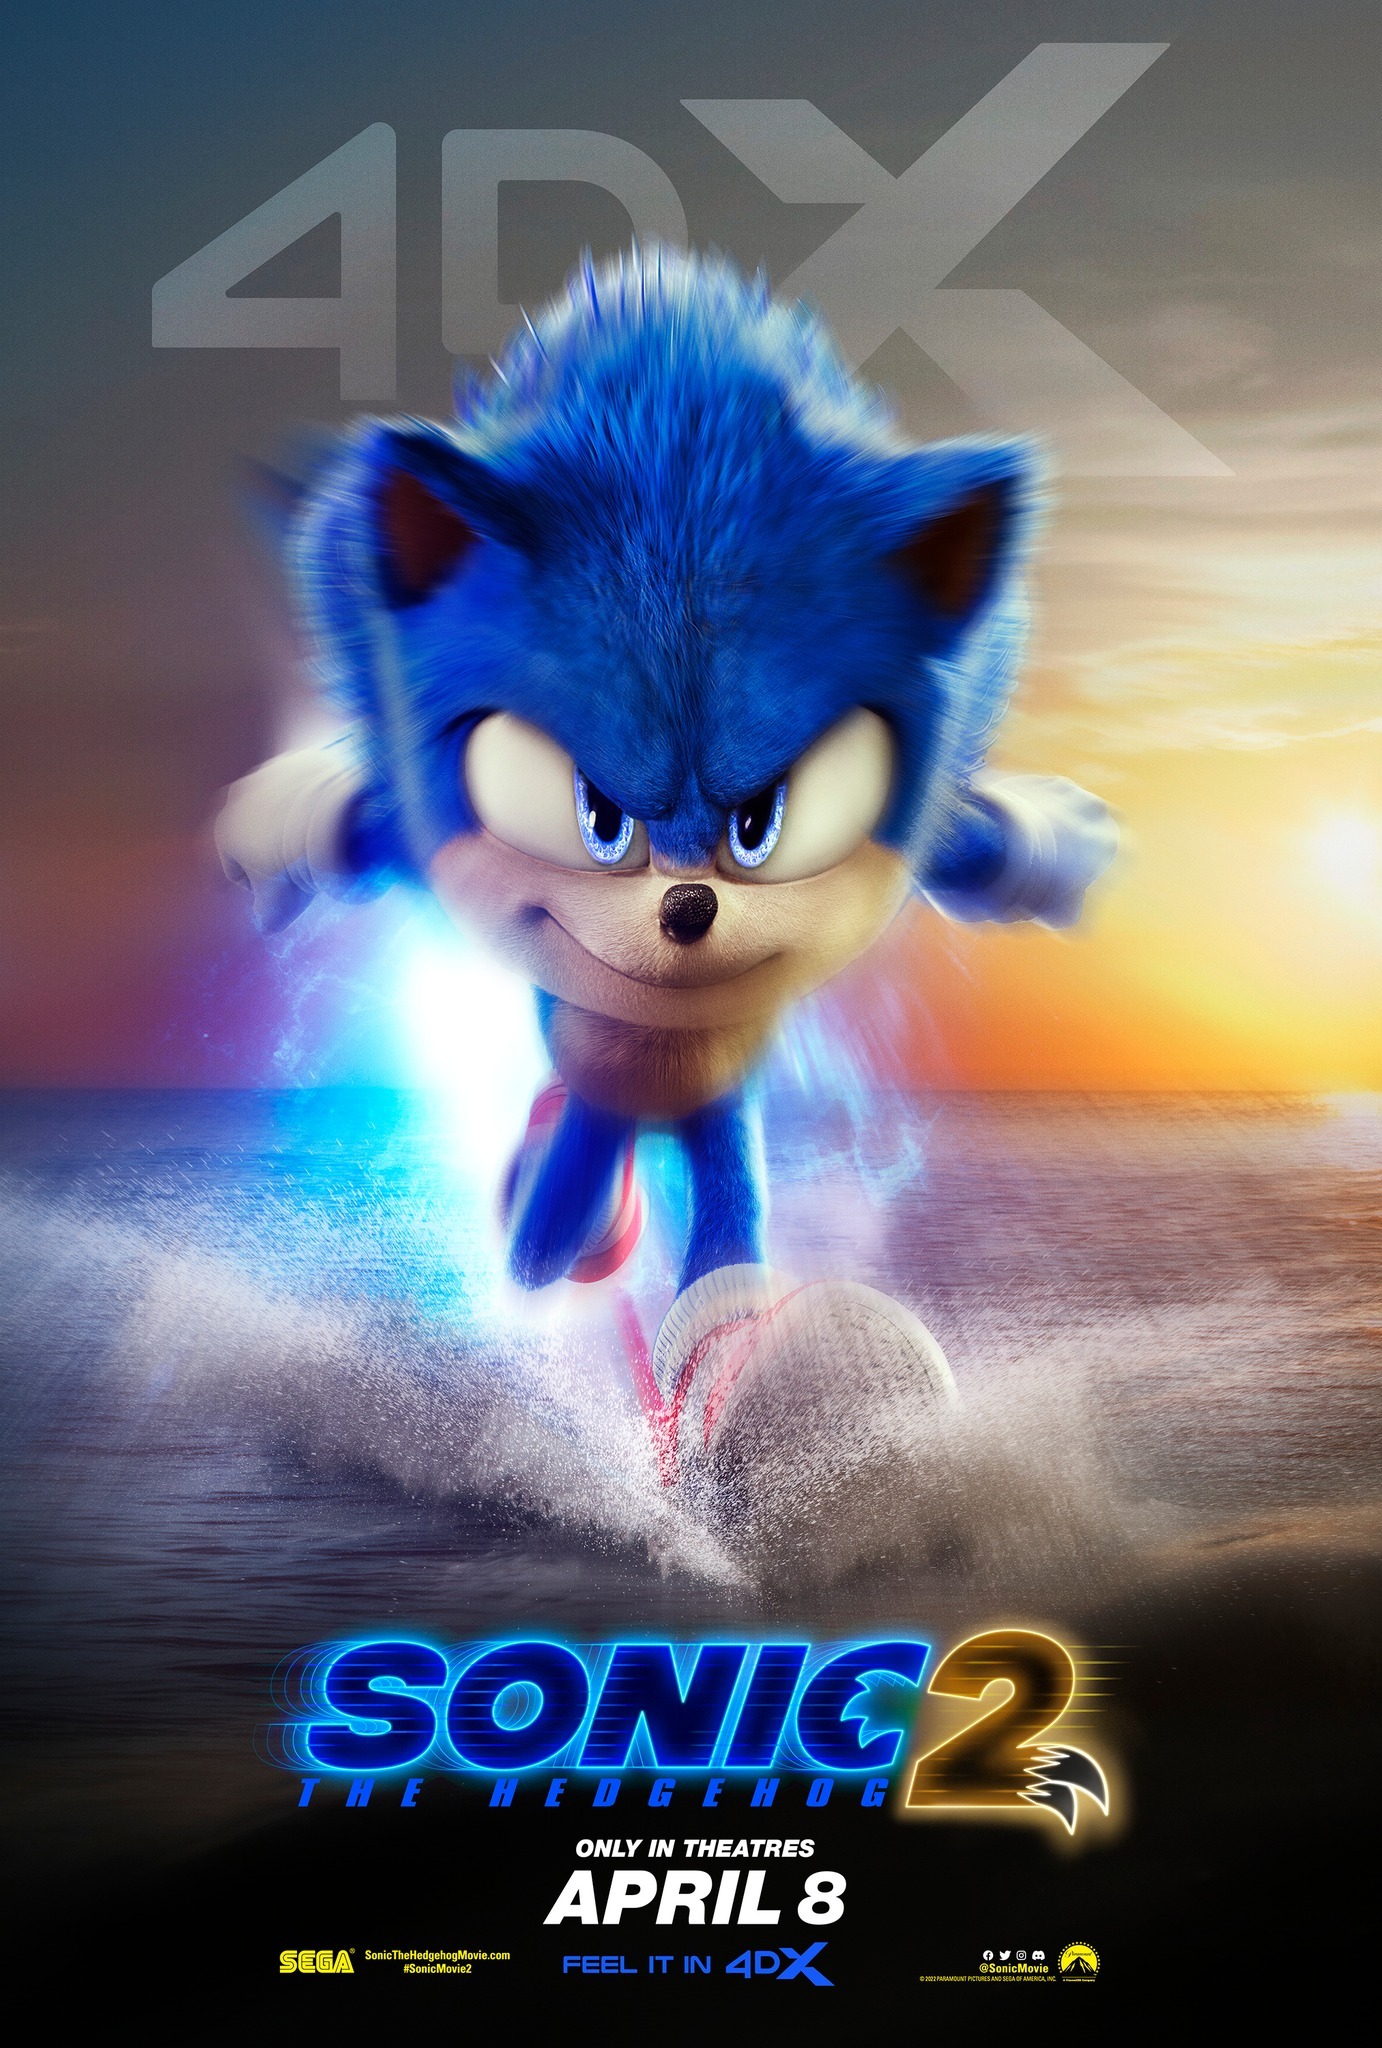 Mega Sized Movie Poster Image for Sonic the Hedgehog 2 (#11 of 34)